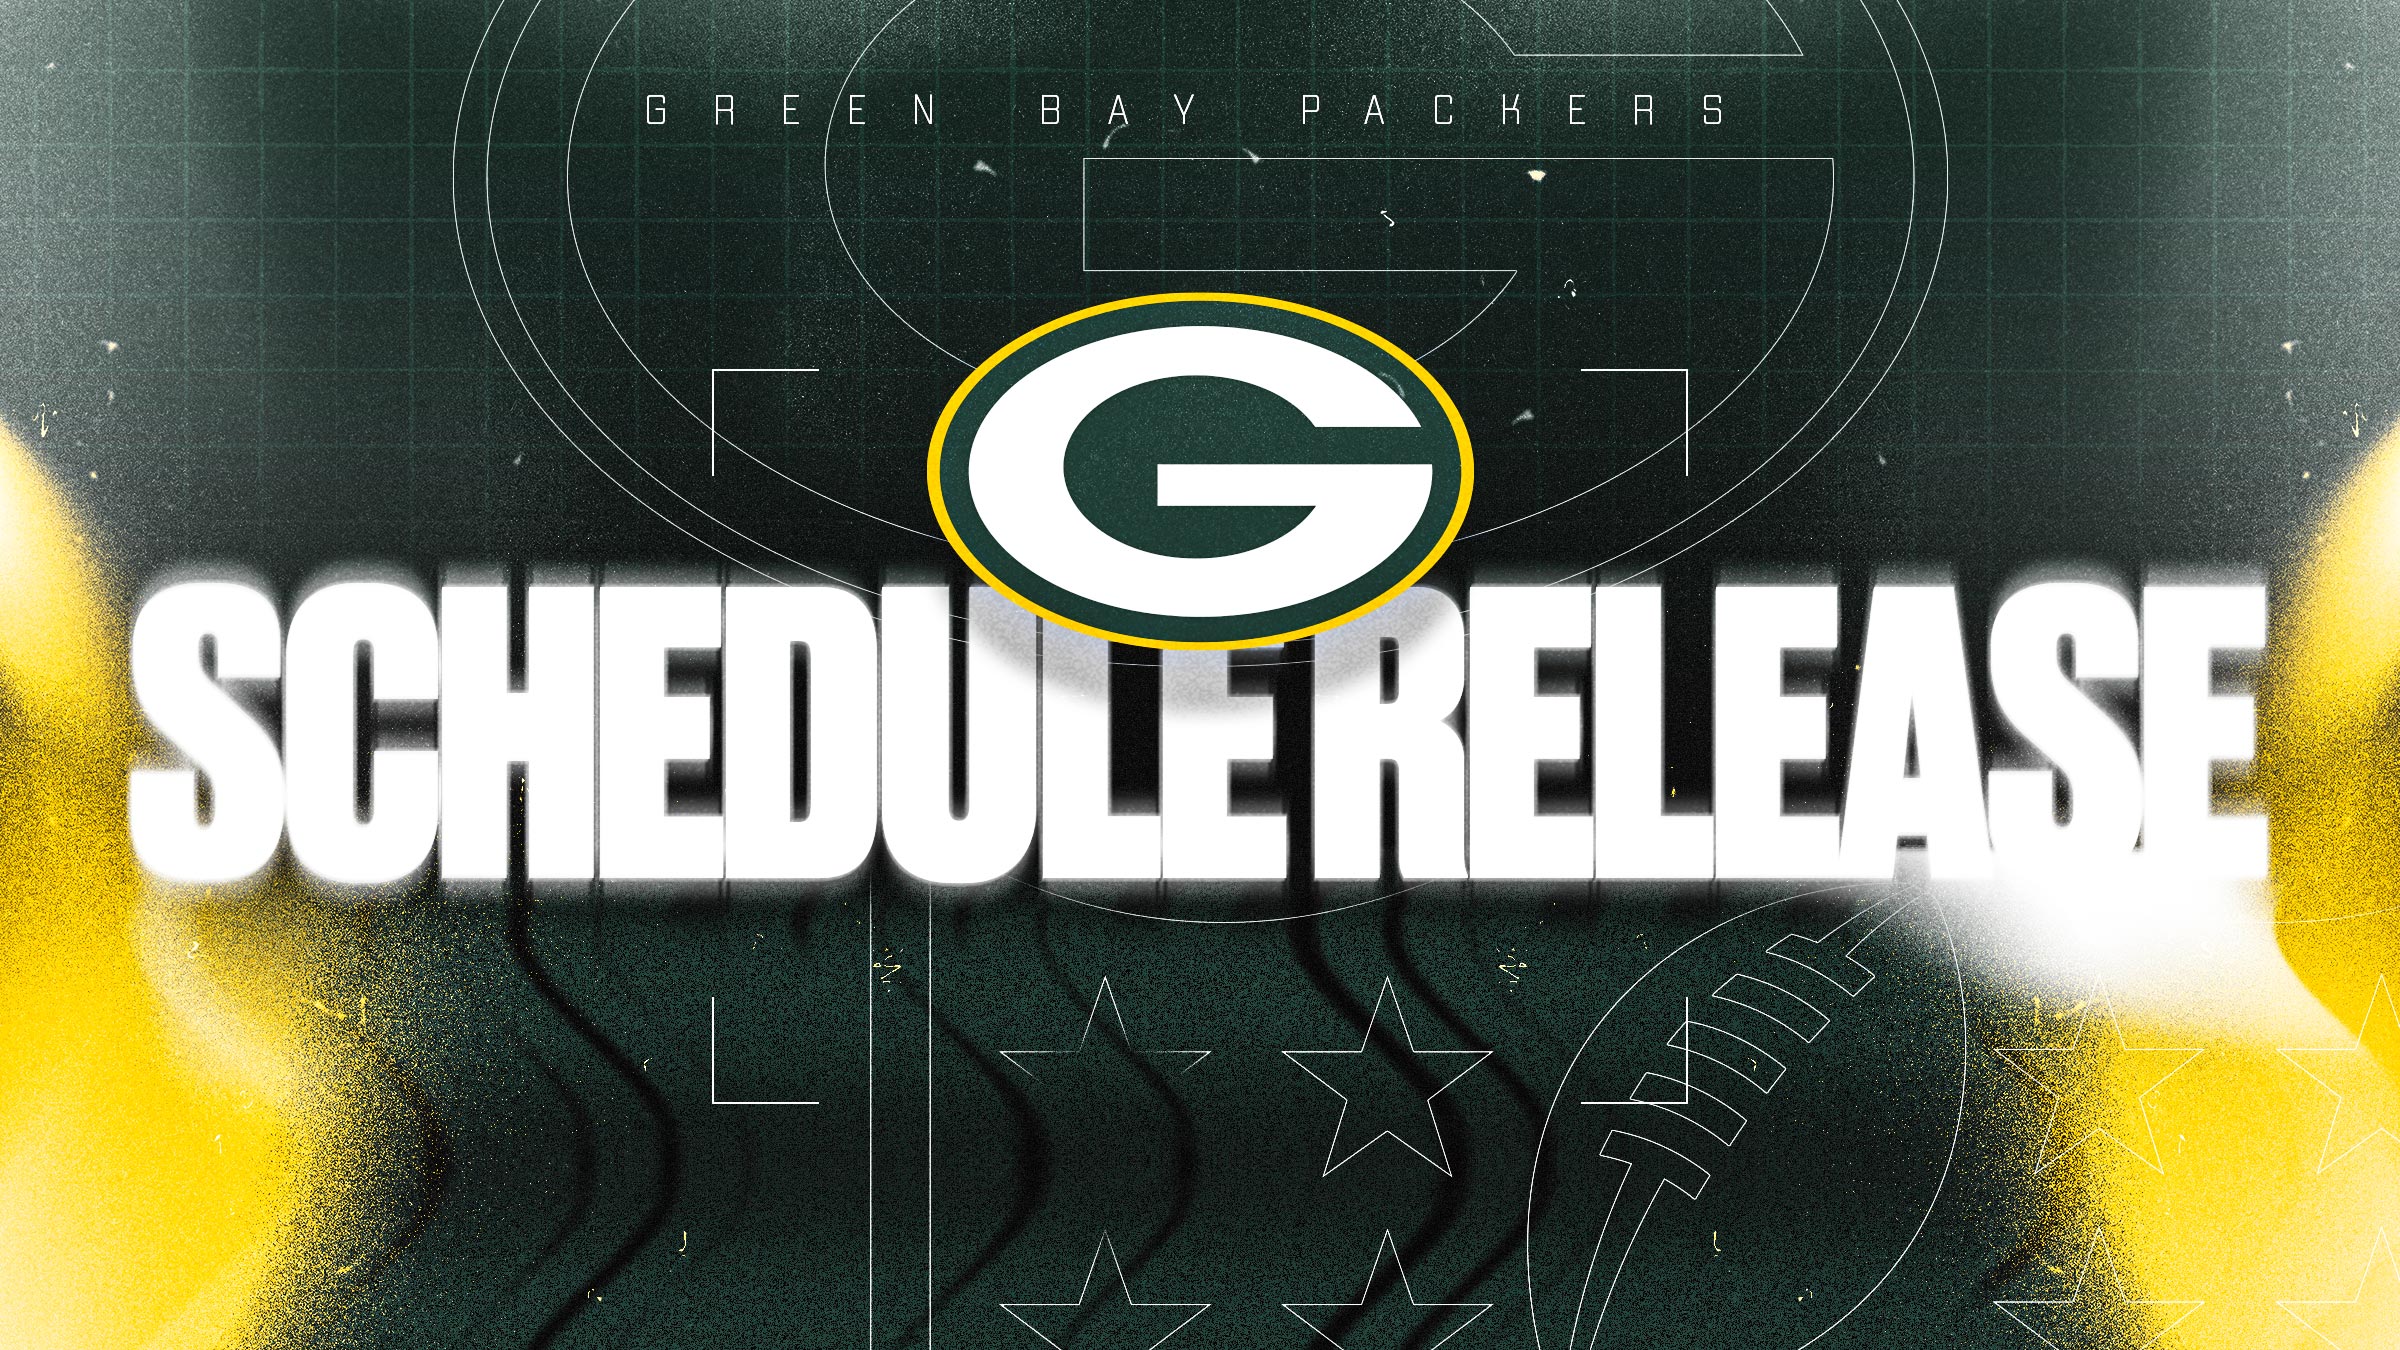 Green Bay Packers 2023 schedule, predictions for wins and losses A2Z